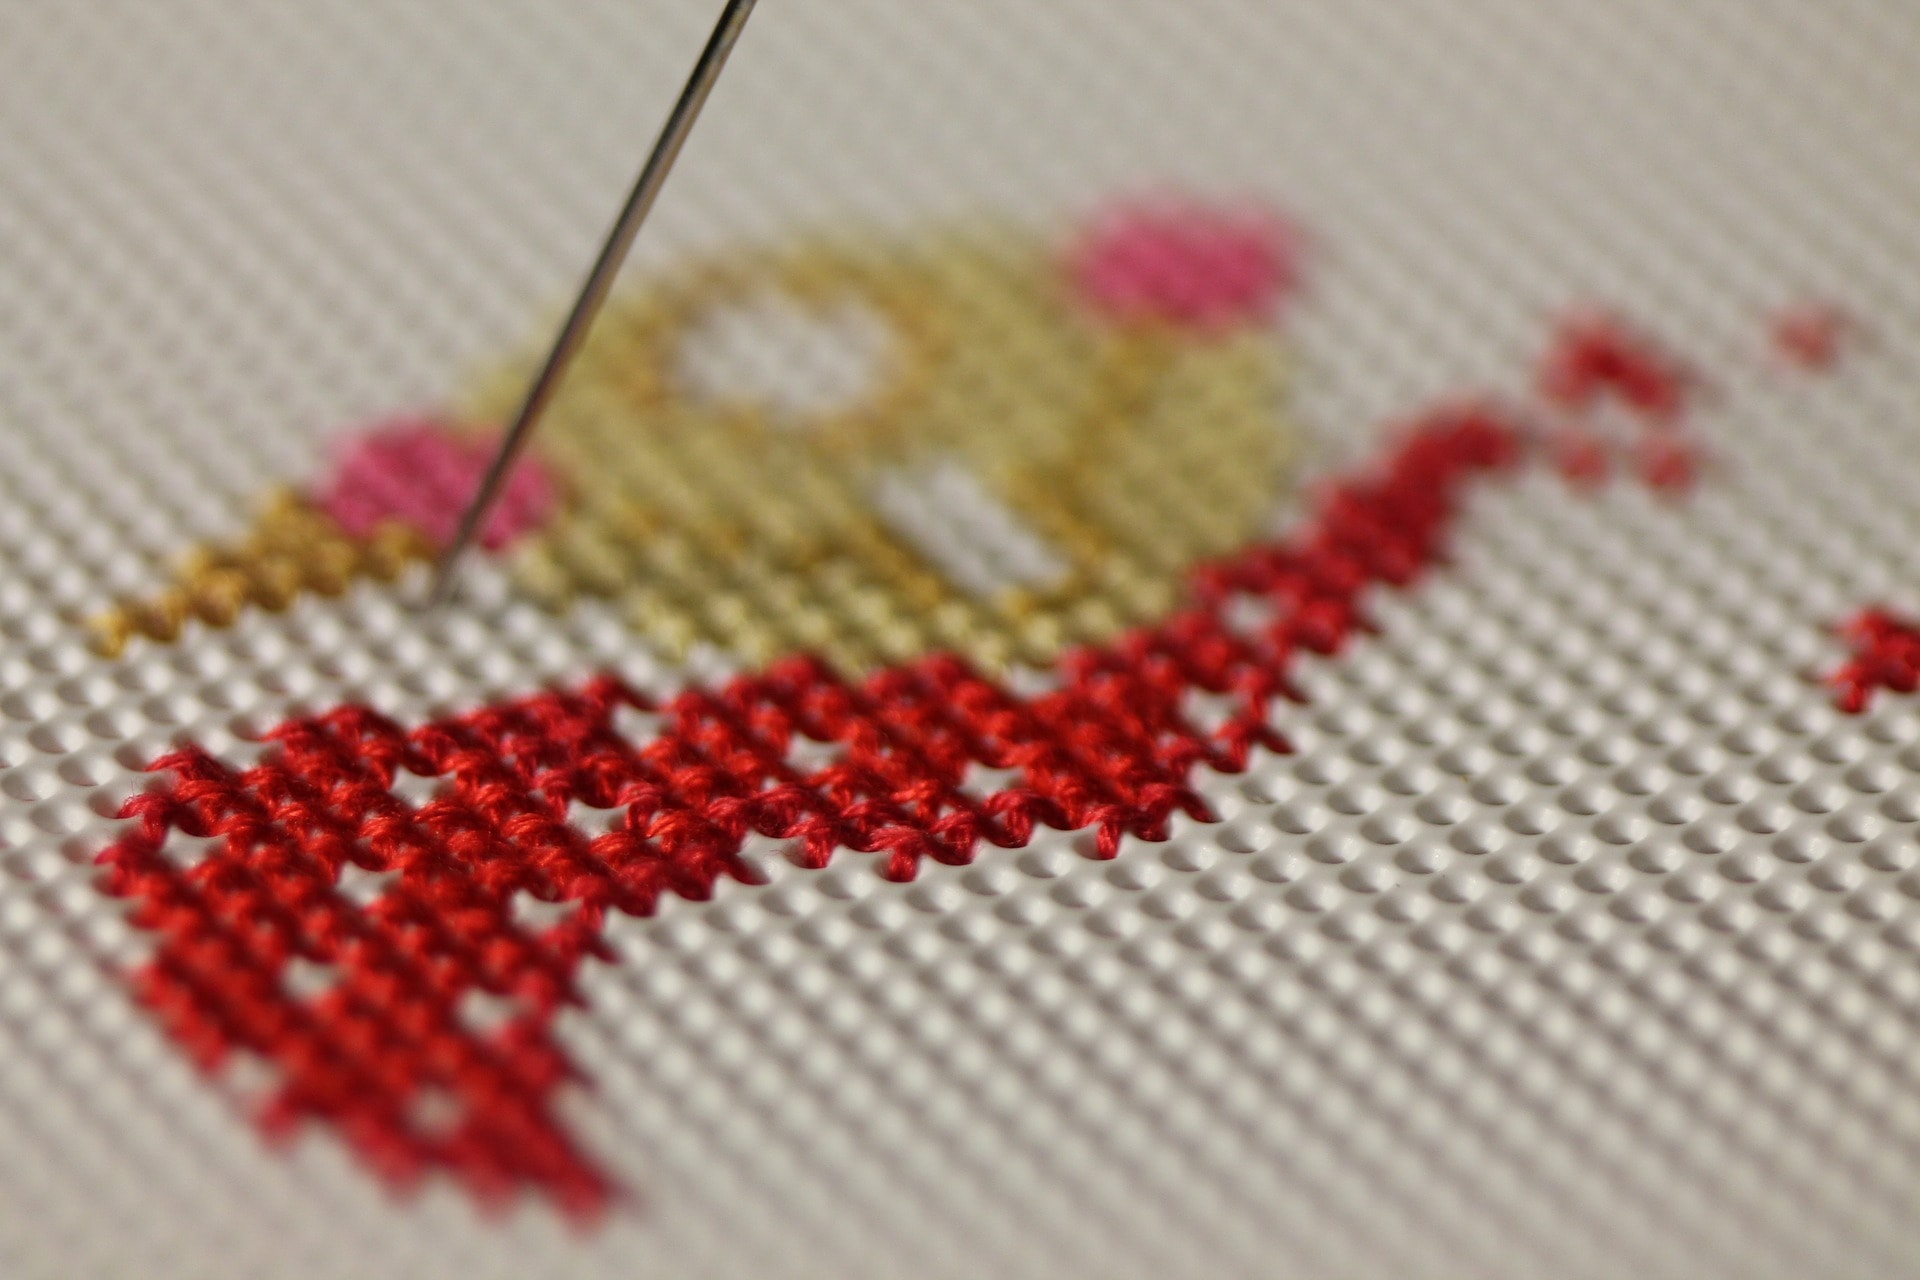 How Long Does it Take to Cross Stitch a Stocking?